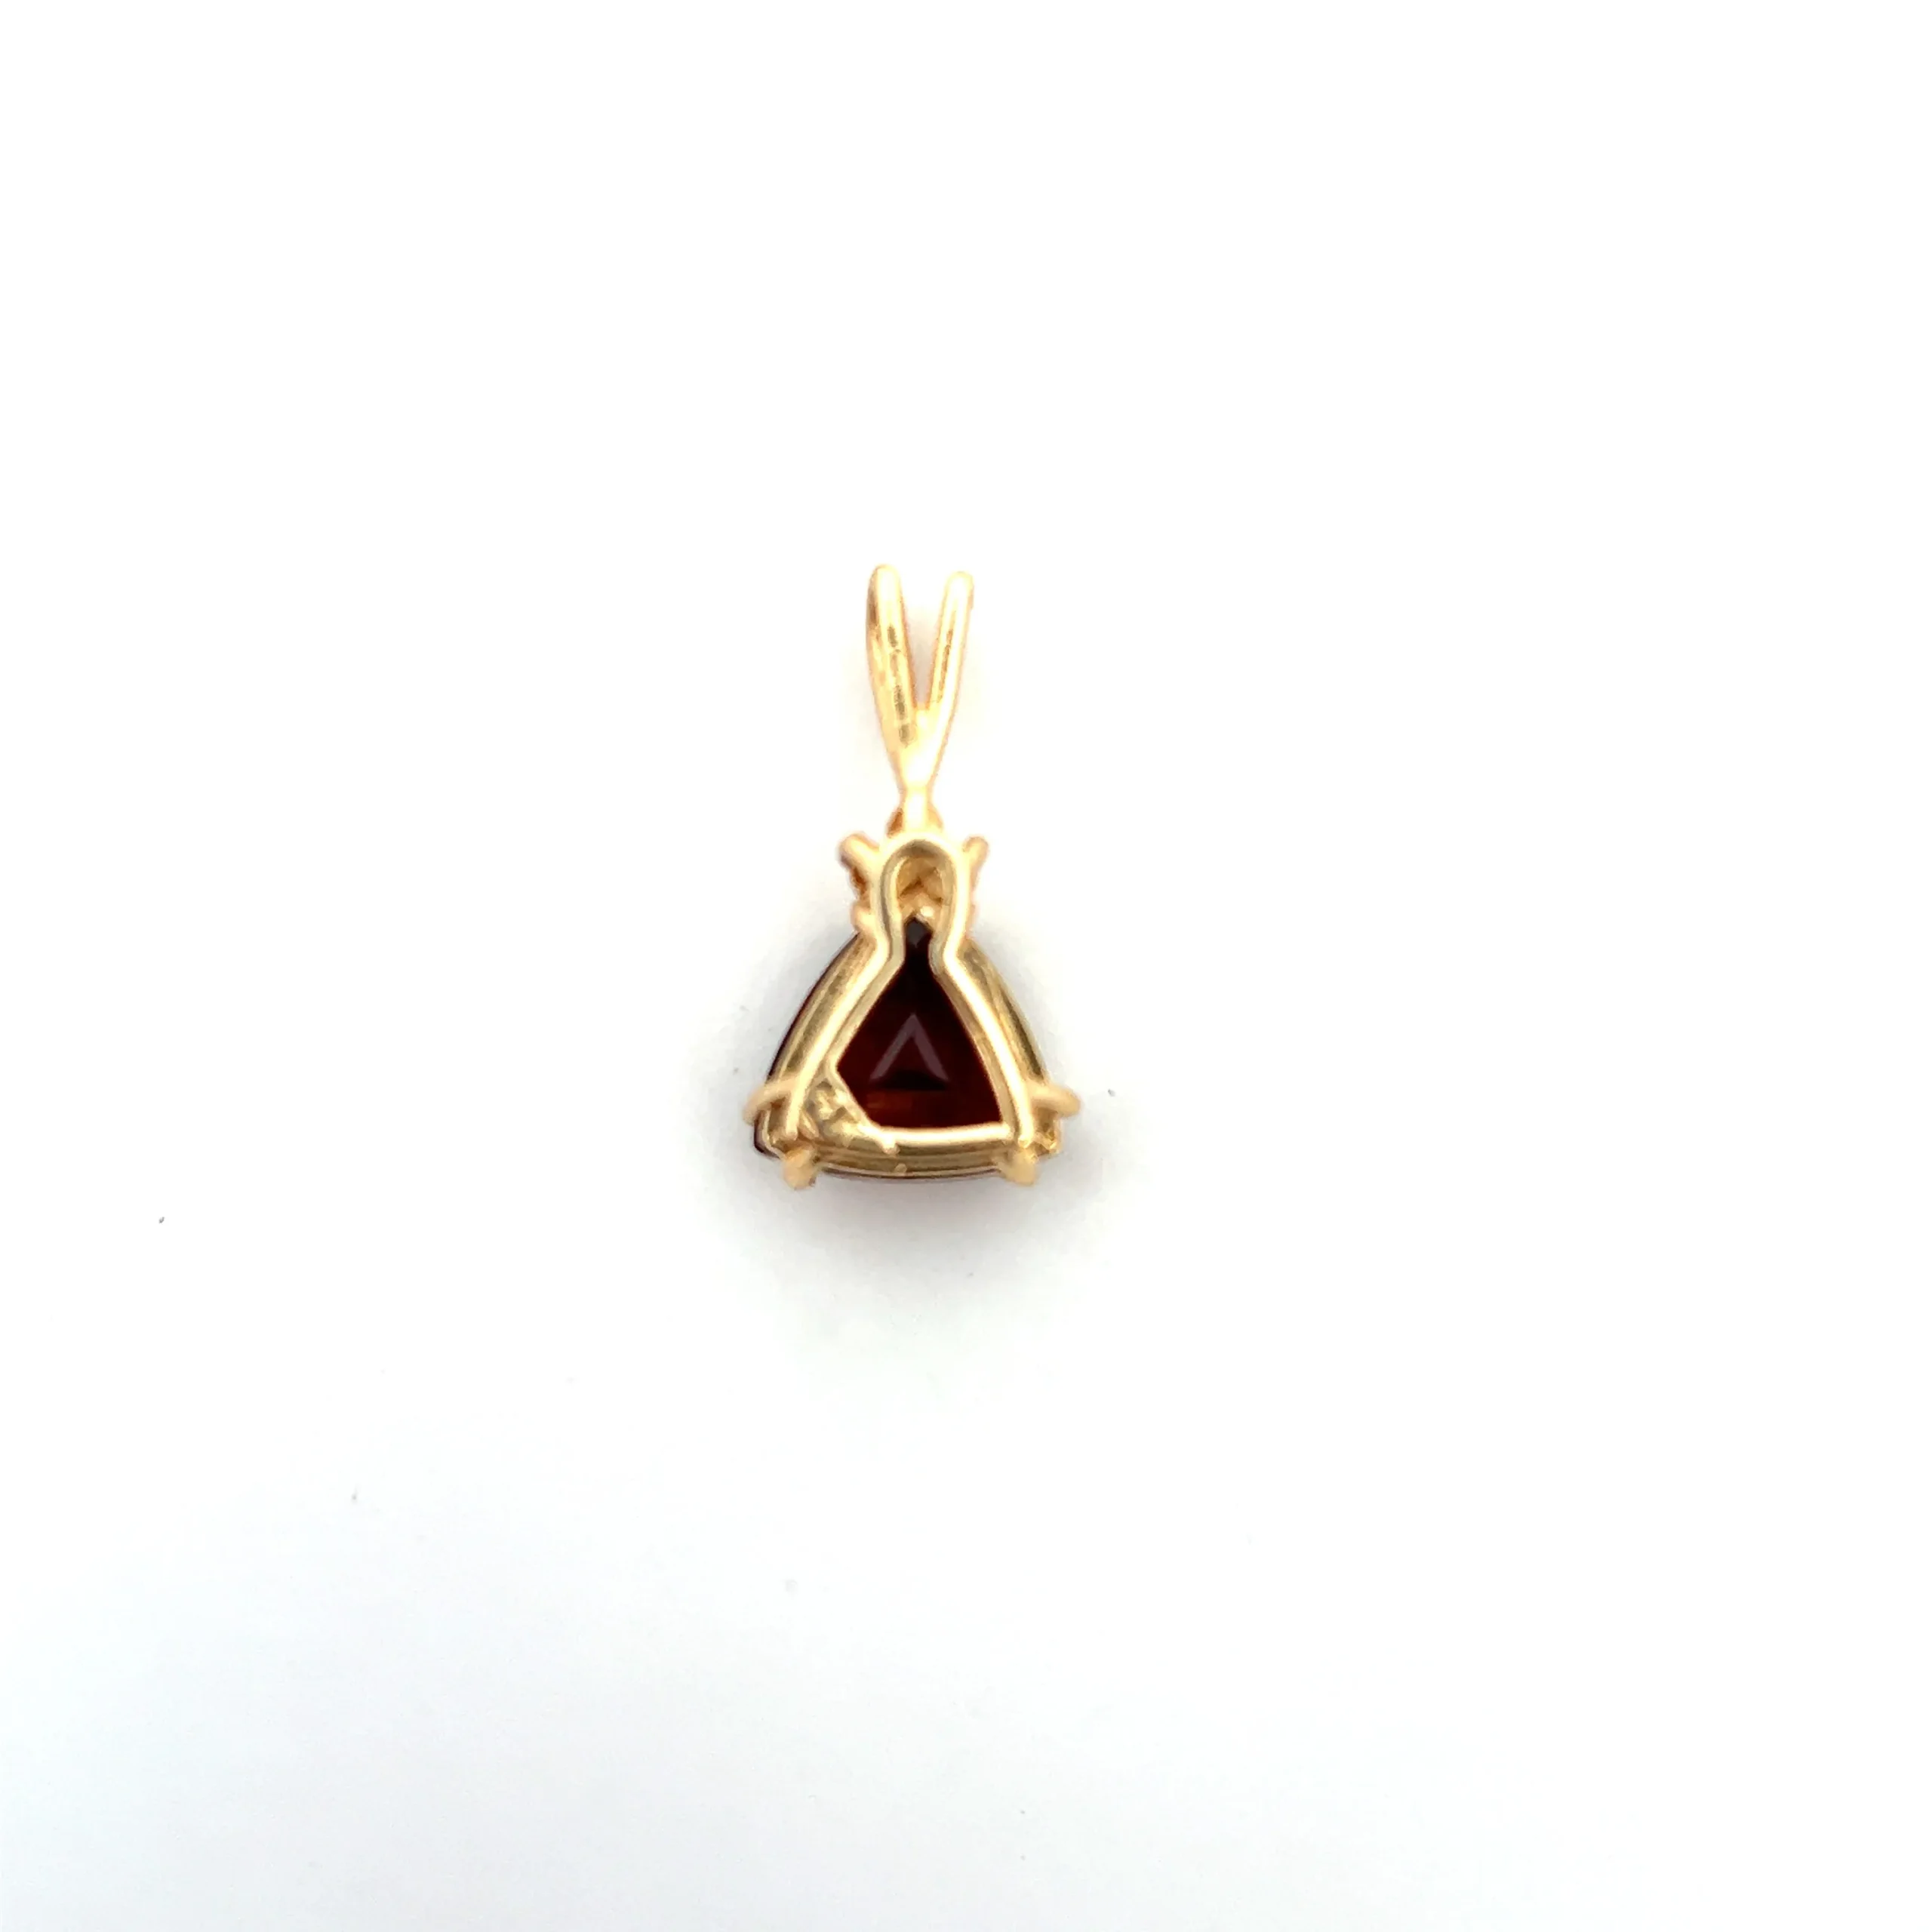 One estate 14 karat yellow gold pendant with a trillion-cut garnet weighing 2.49 carats and 3 round brilliant diamonds weighing 0.05 carat total weight clustered at the top of the garnet. the pendant has a rabbit-ear bail.